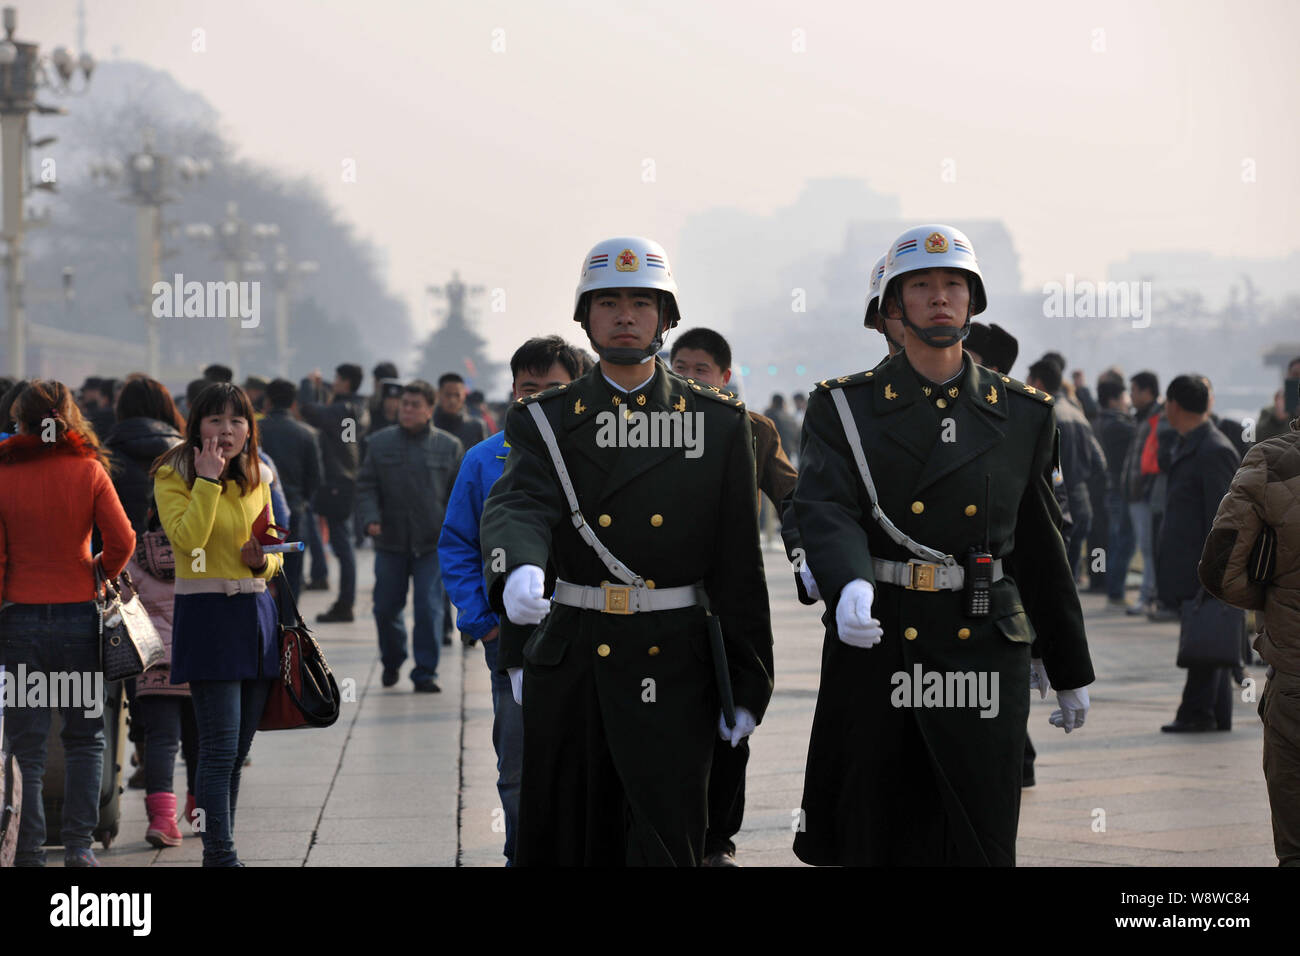 Chinese paramilitary policemen patrol past a crowd of tourists at the Tiananmen Square in Beijing, China, 2 March 2014.   Beijing has stepped up secur Stock Photo